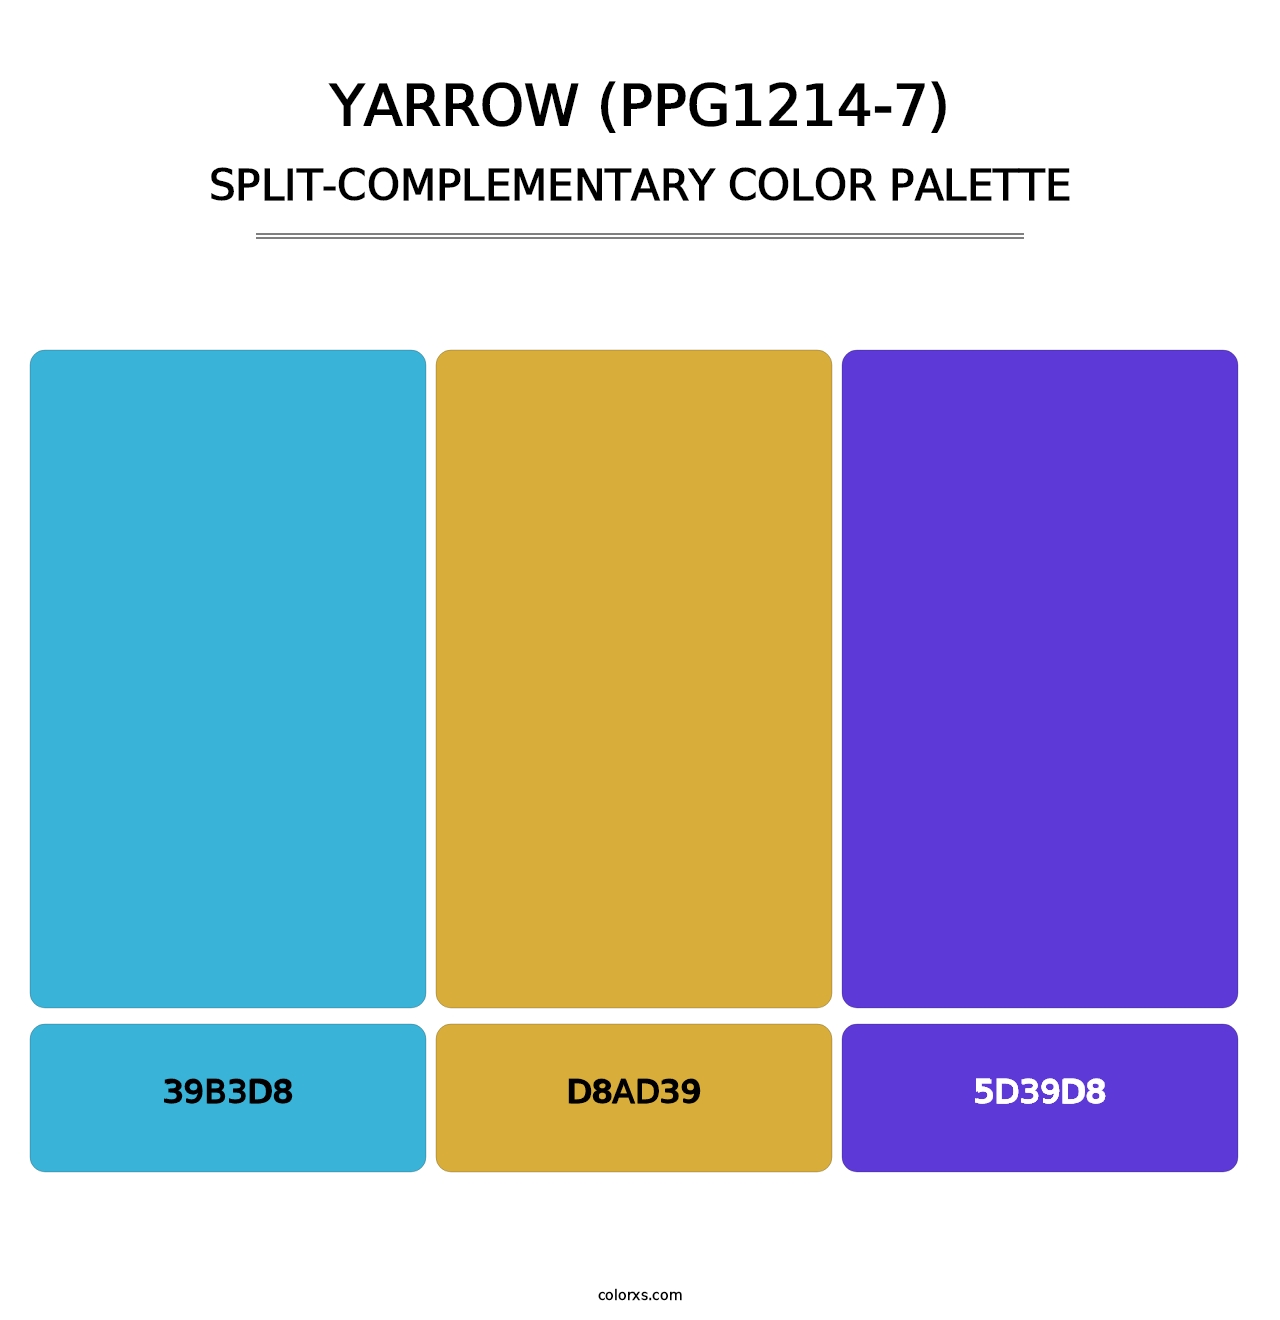 Yarrow (PPG1214-7) - Split-Complementary Color Palette